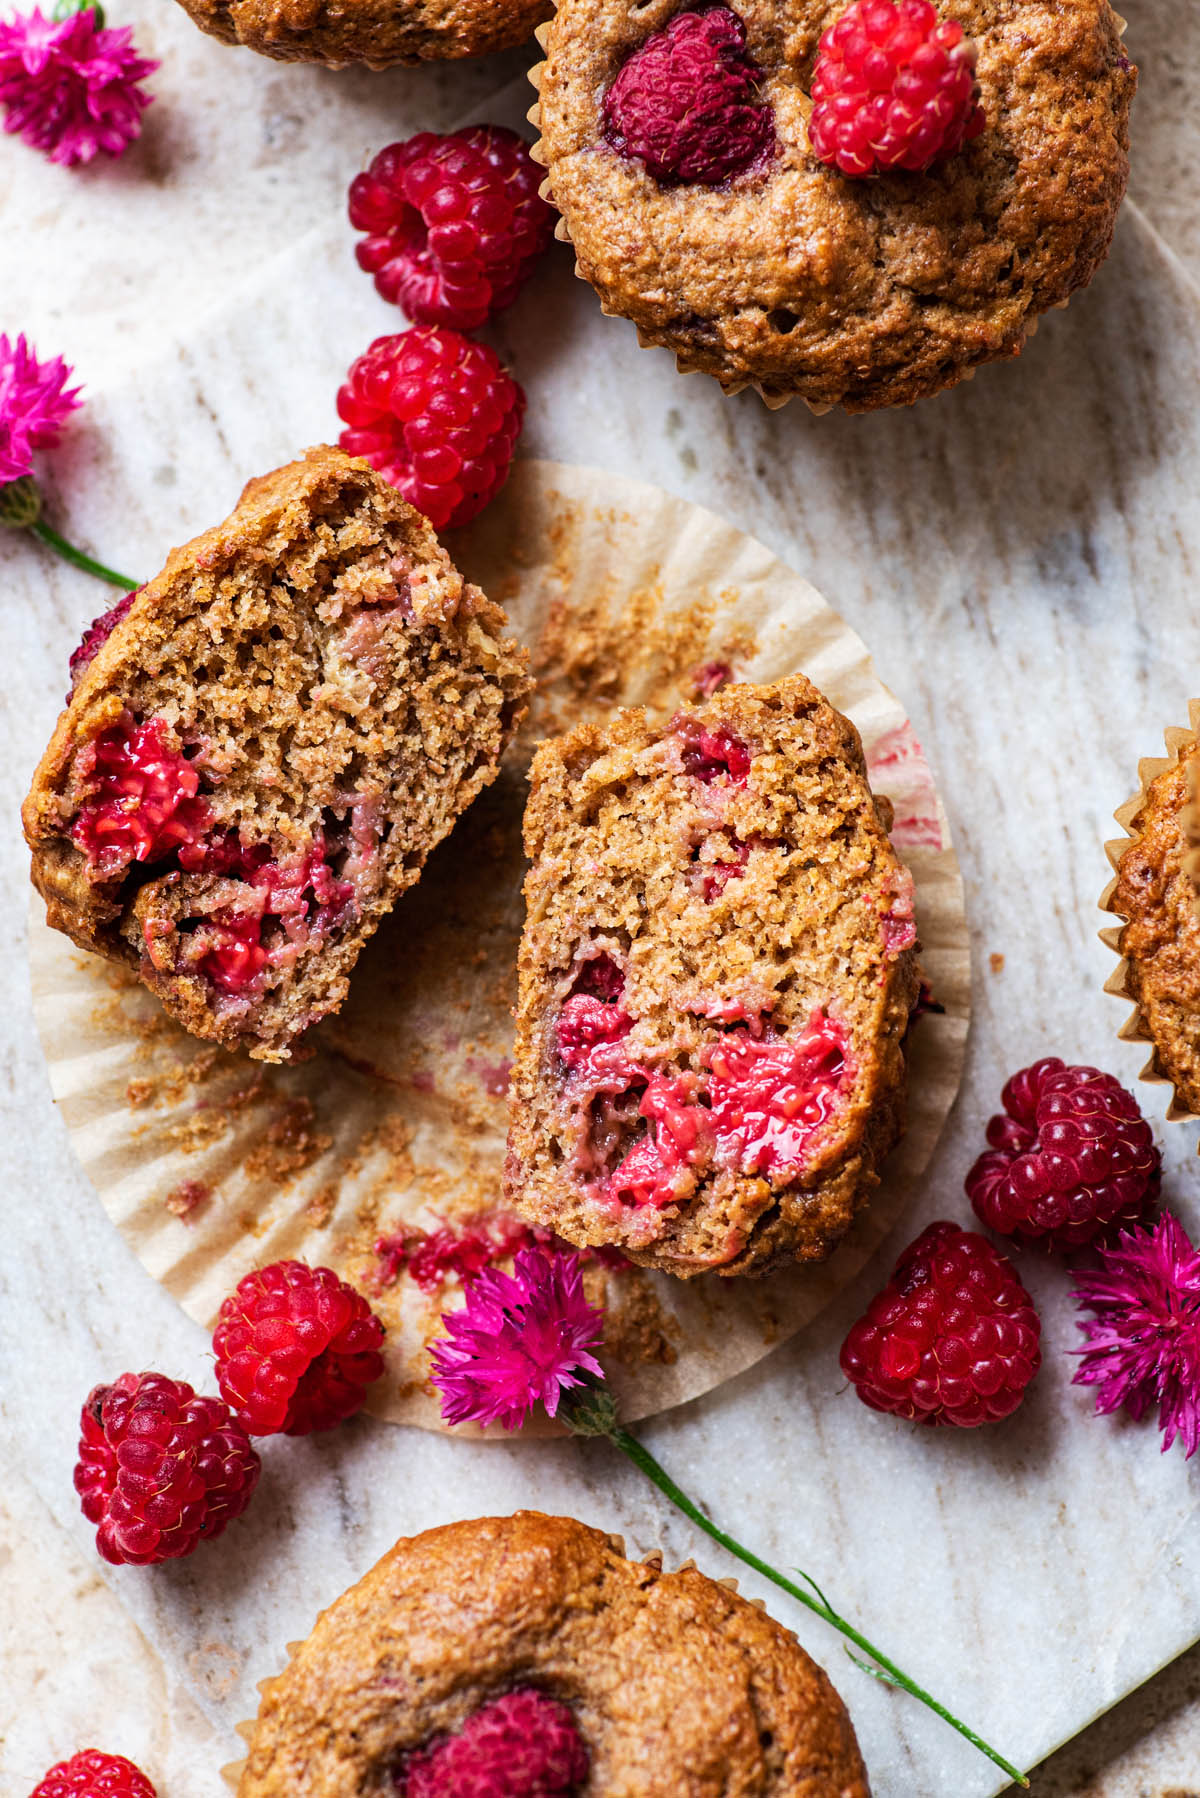 A raspberry muffin cut in half to show interior texture.